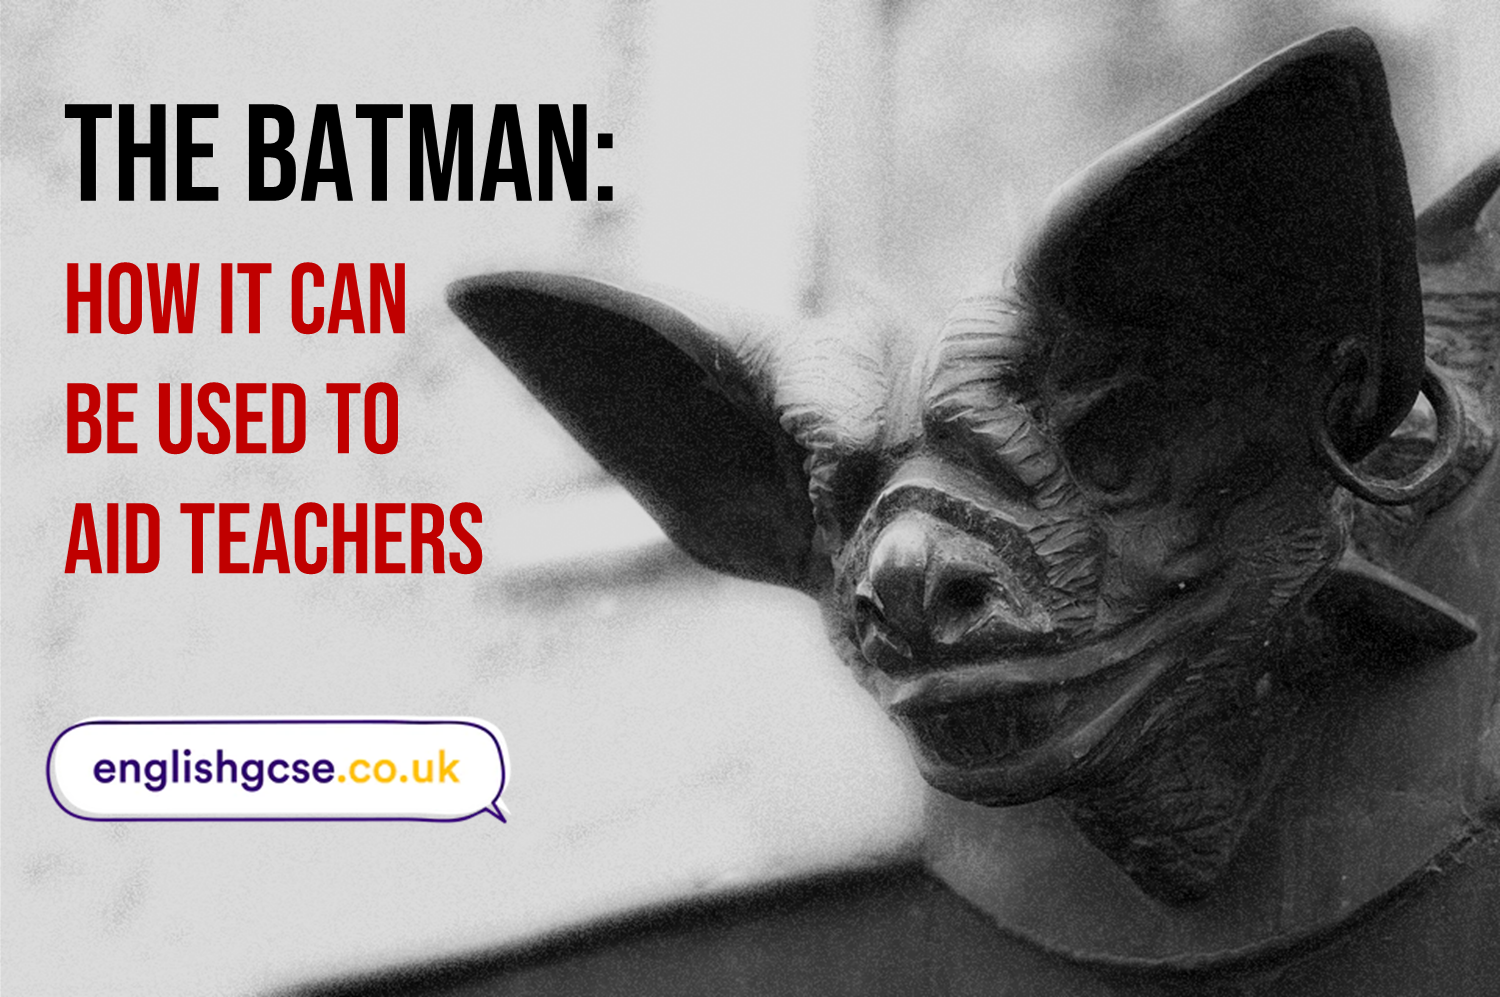 The Batman: How it can be used to aid teachers